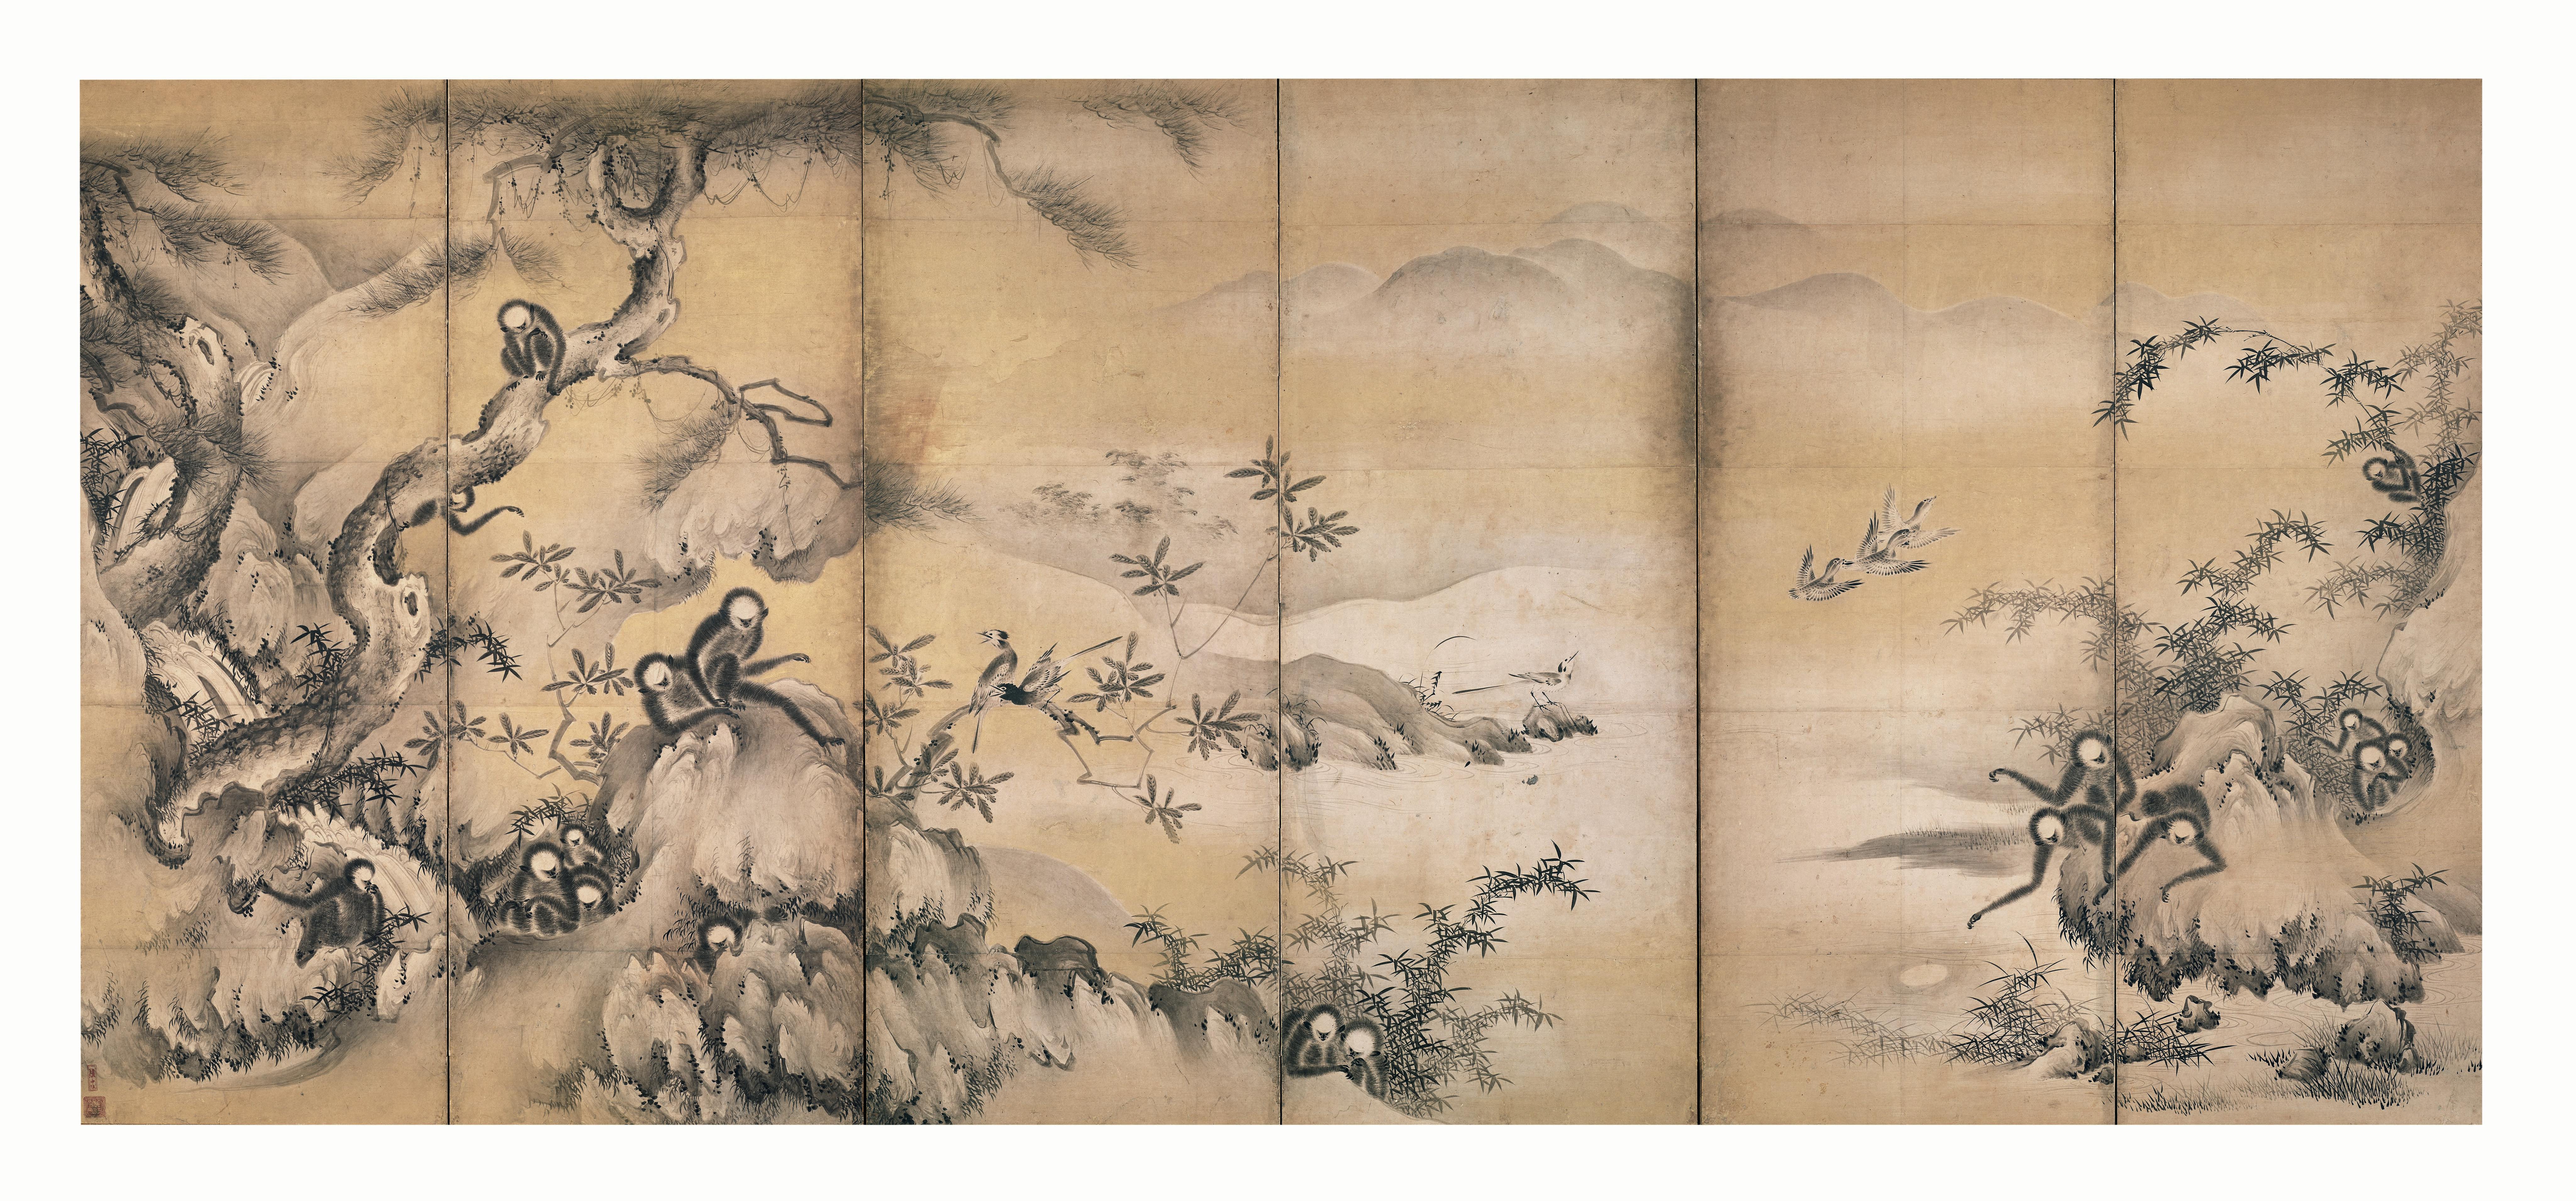 The Japanese Renaissance. Nature on painted screens from the 15th to the 17th centuries